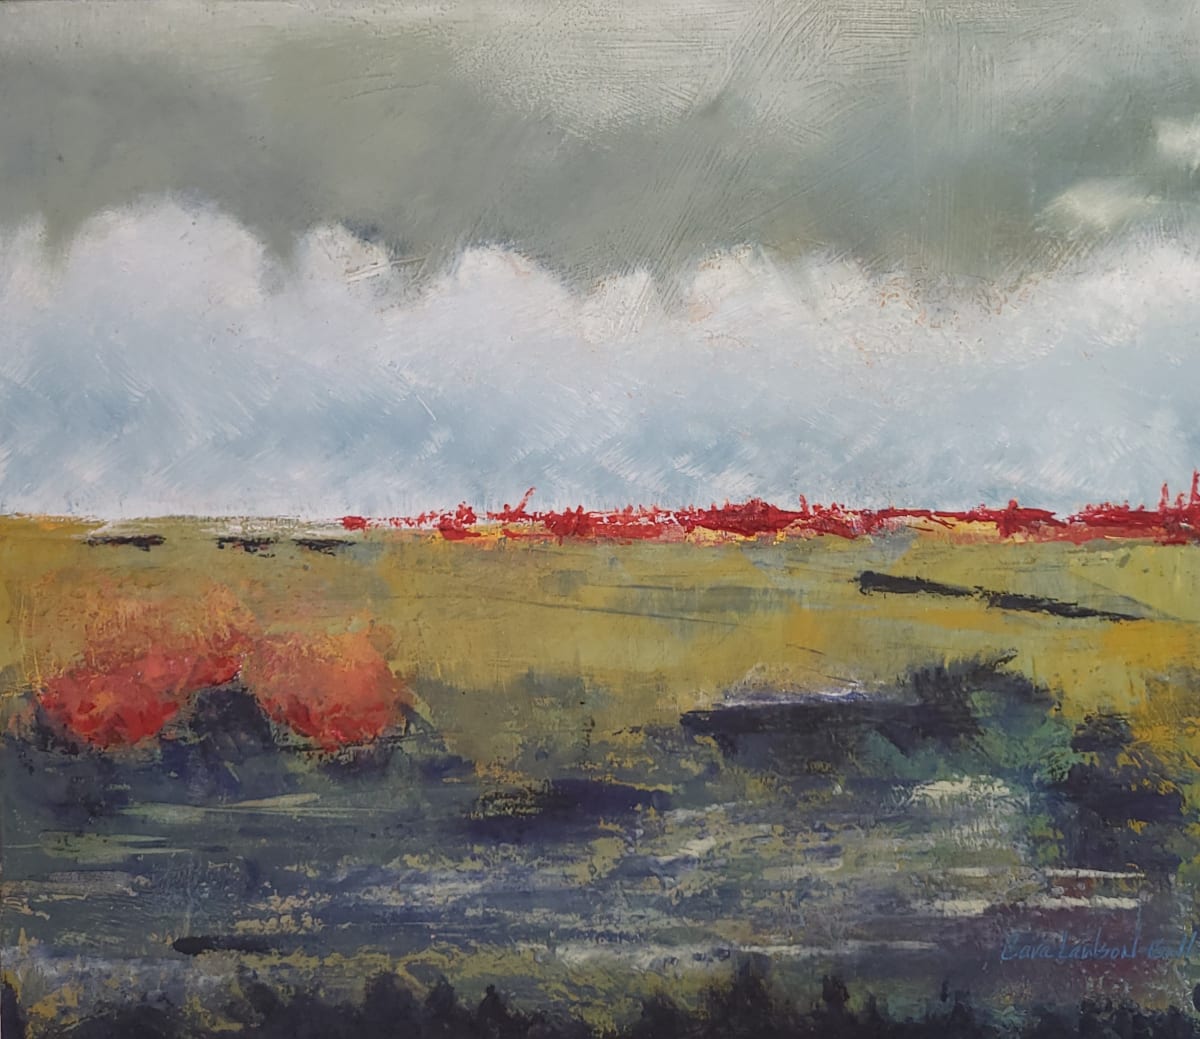 Mercurial Mood by Cara Lawson-Ball  Image: Oil and cold wax abstract landscape painting